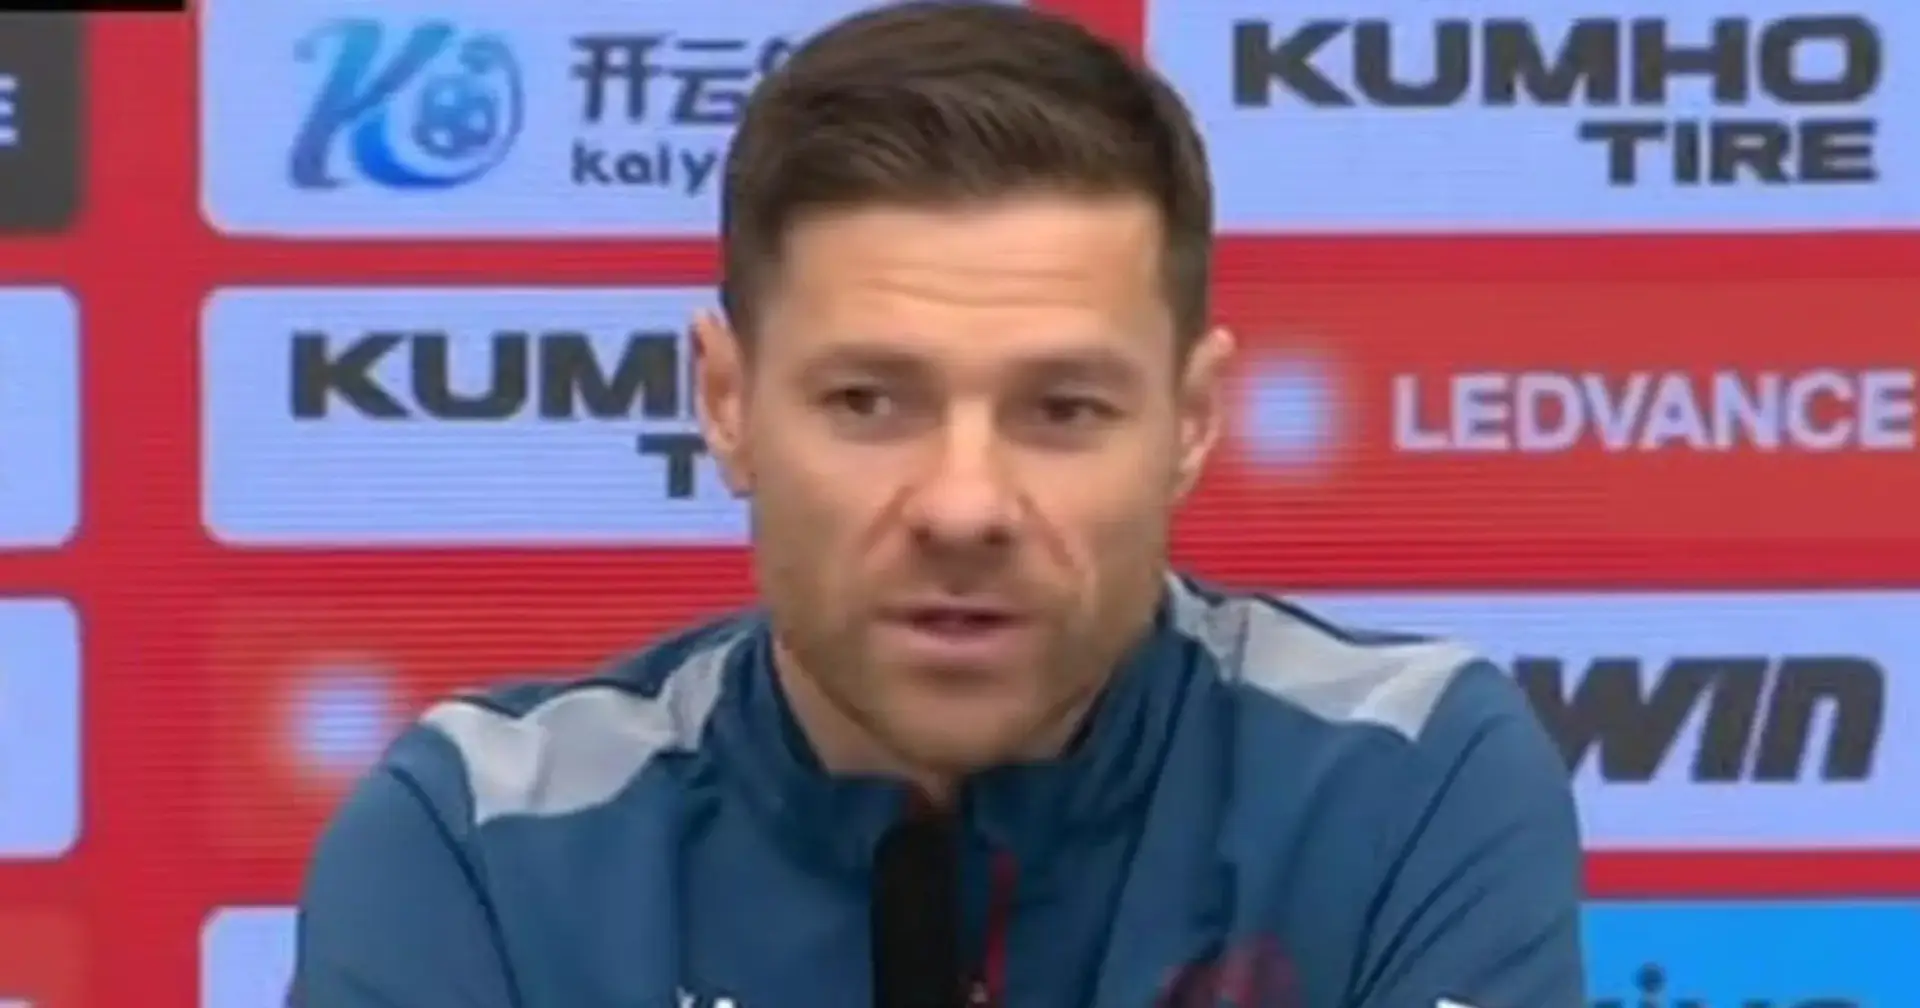 Xabi Alonso rules himself out of Liverpool job and 2 more big stories you might've missed